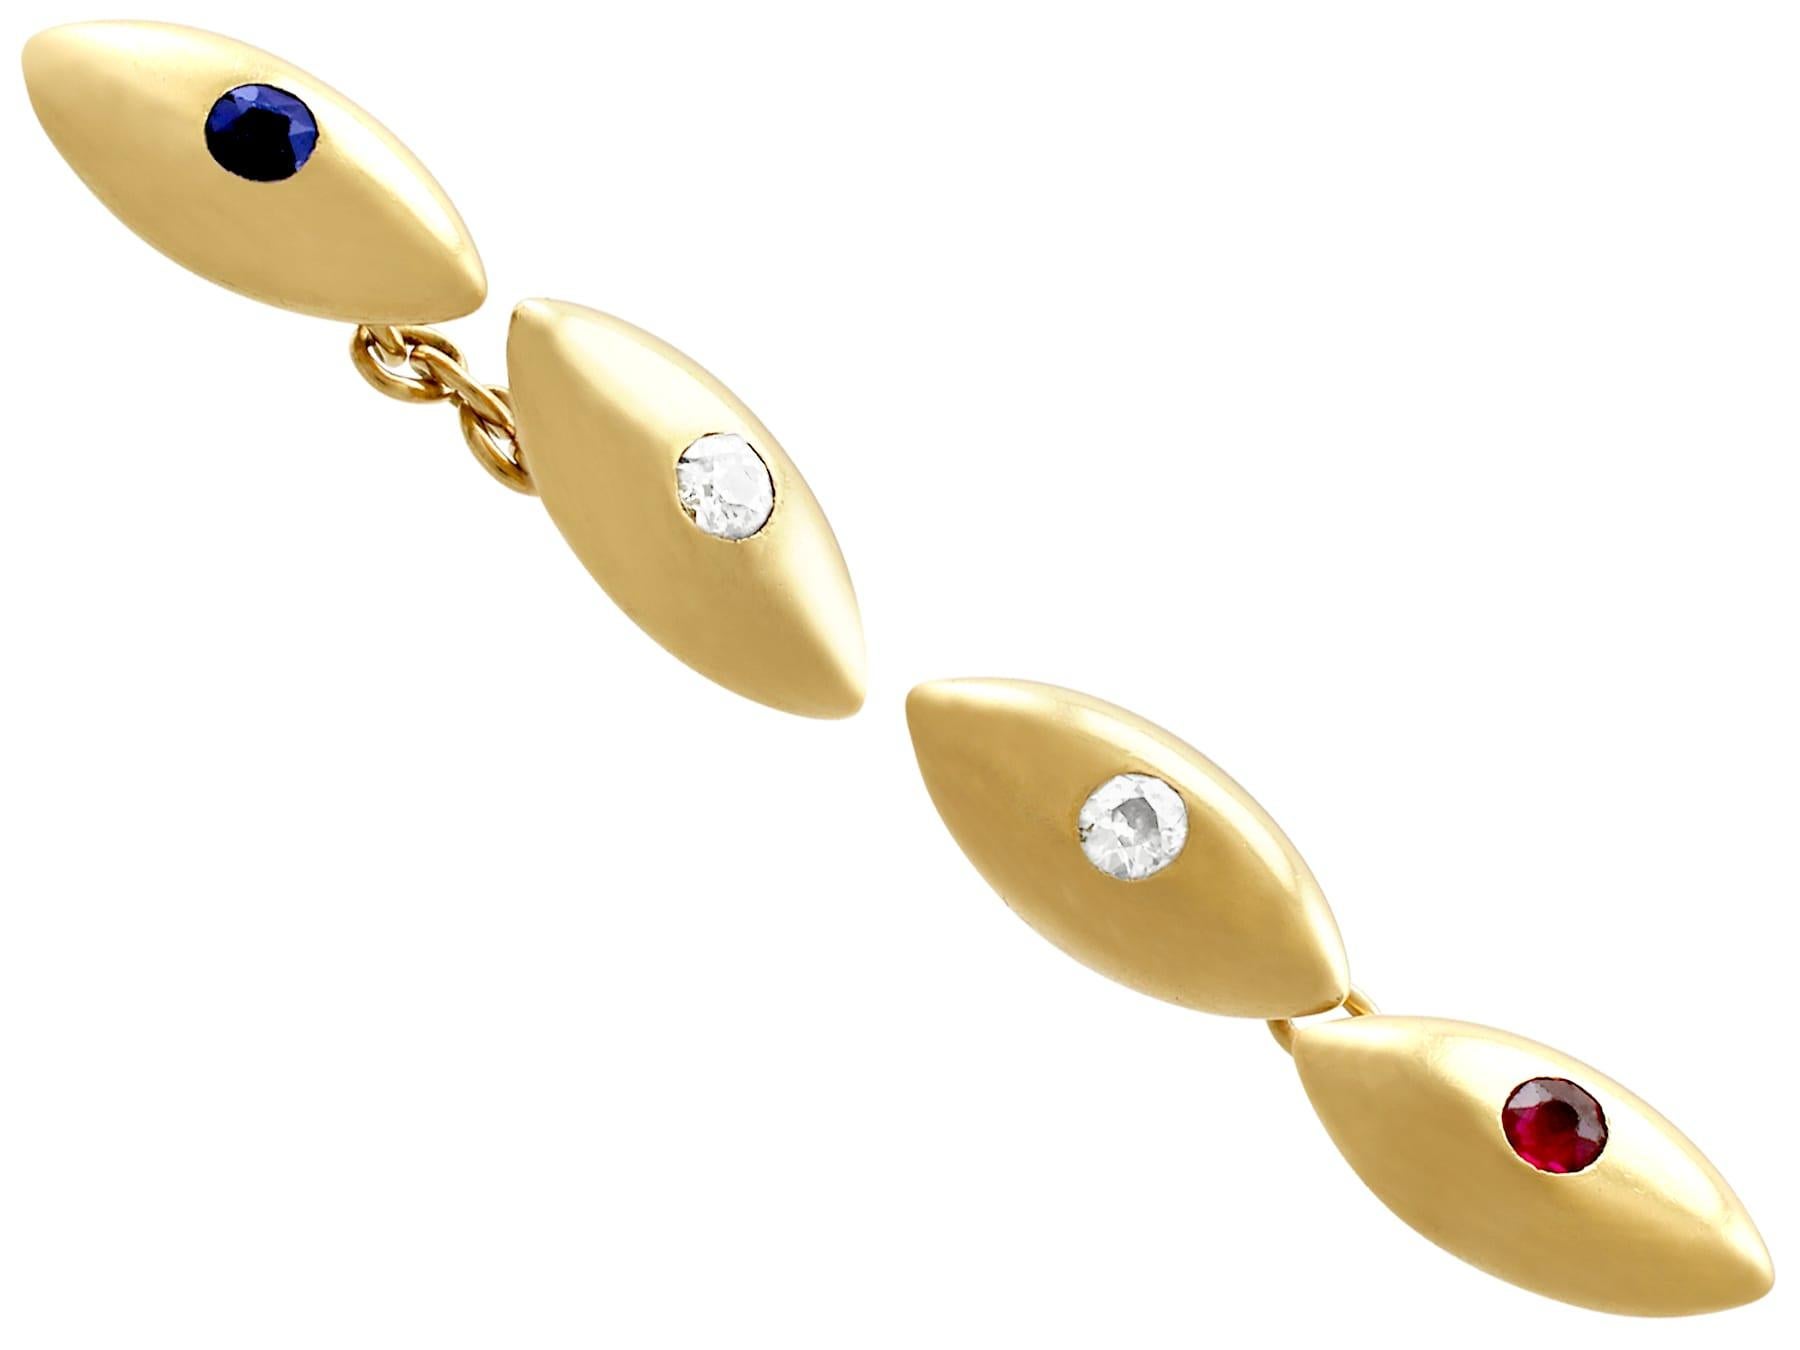 An impressive pair of antique French 0.33 carat sapphire and 0.30 carat ruby, 0.59 carat diamond and 18 karat yellow gold cufflinks; part of our diverse antique jewelry collections.

These fine and impressive gold cufflinks have been crafted in 18k